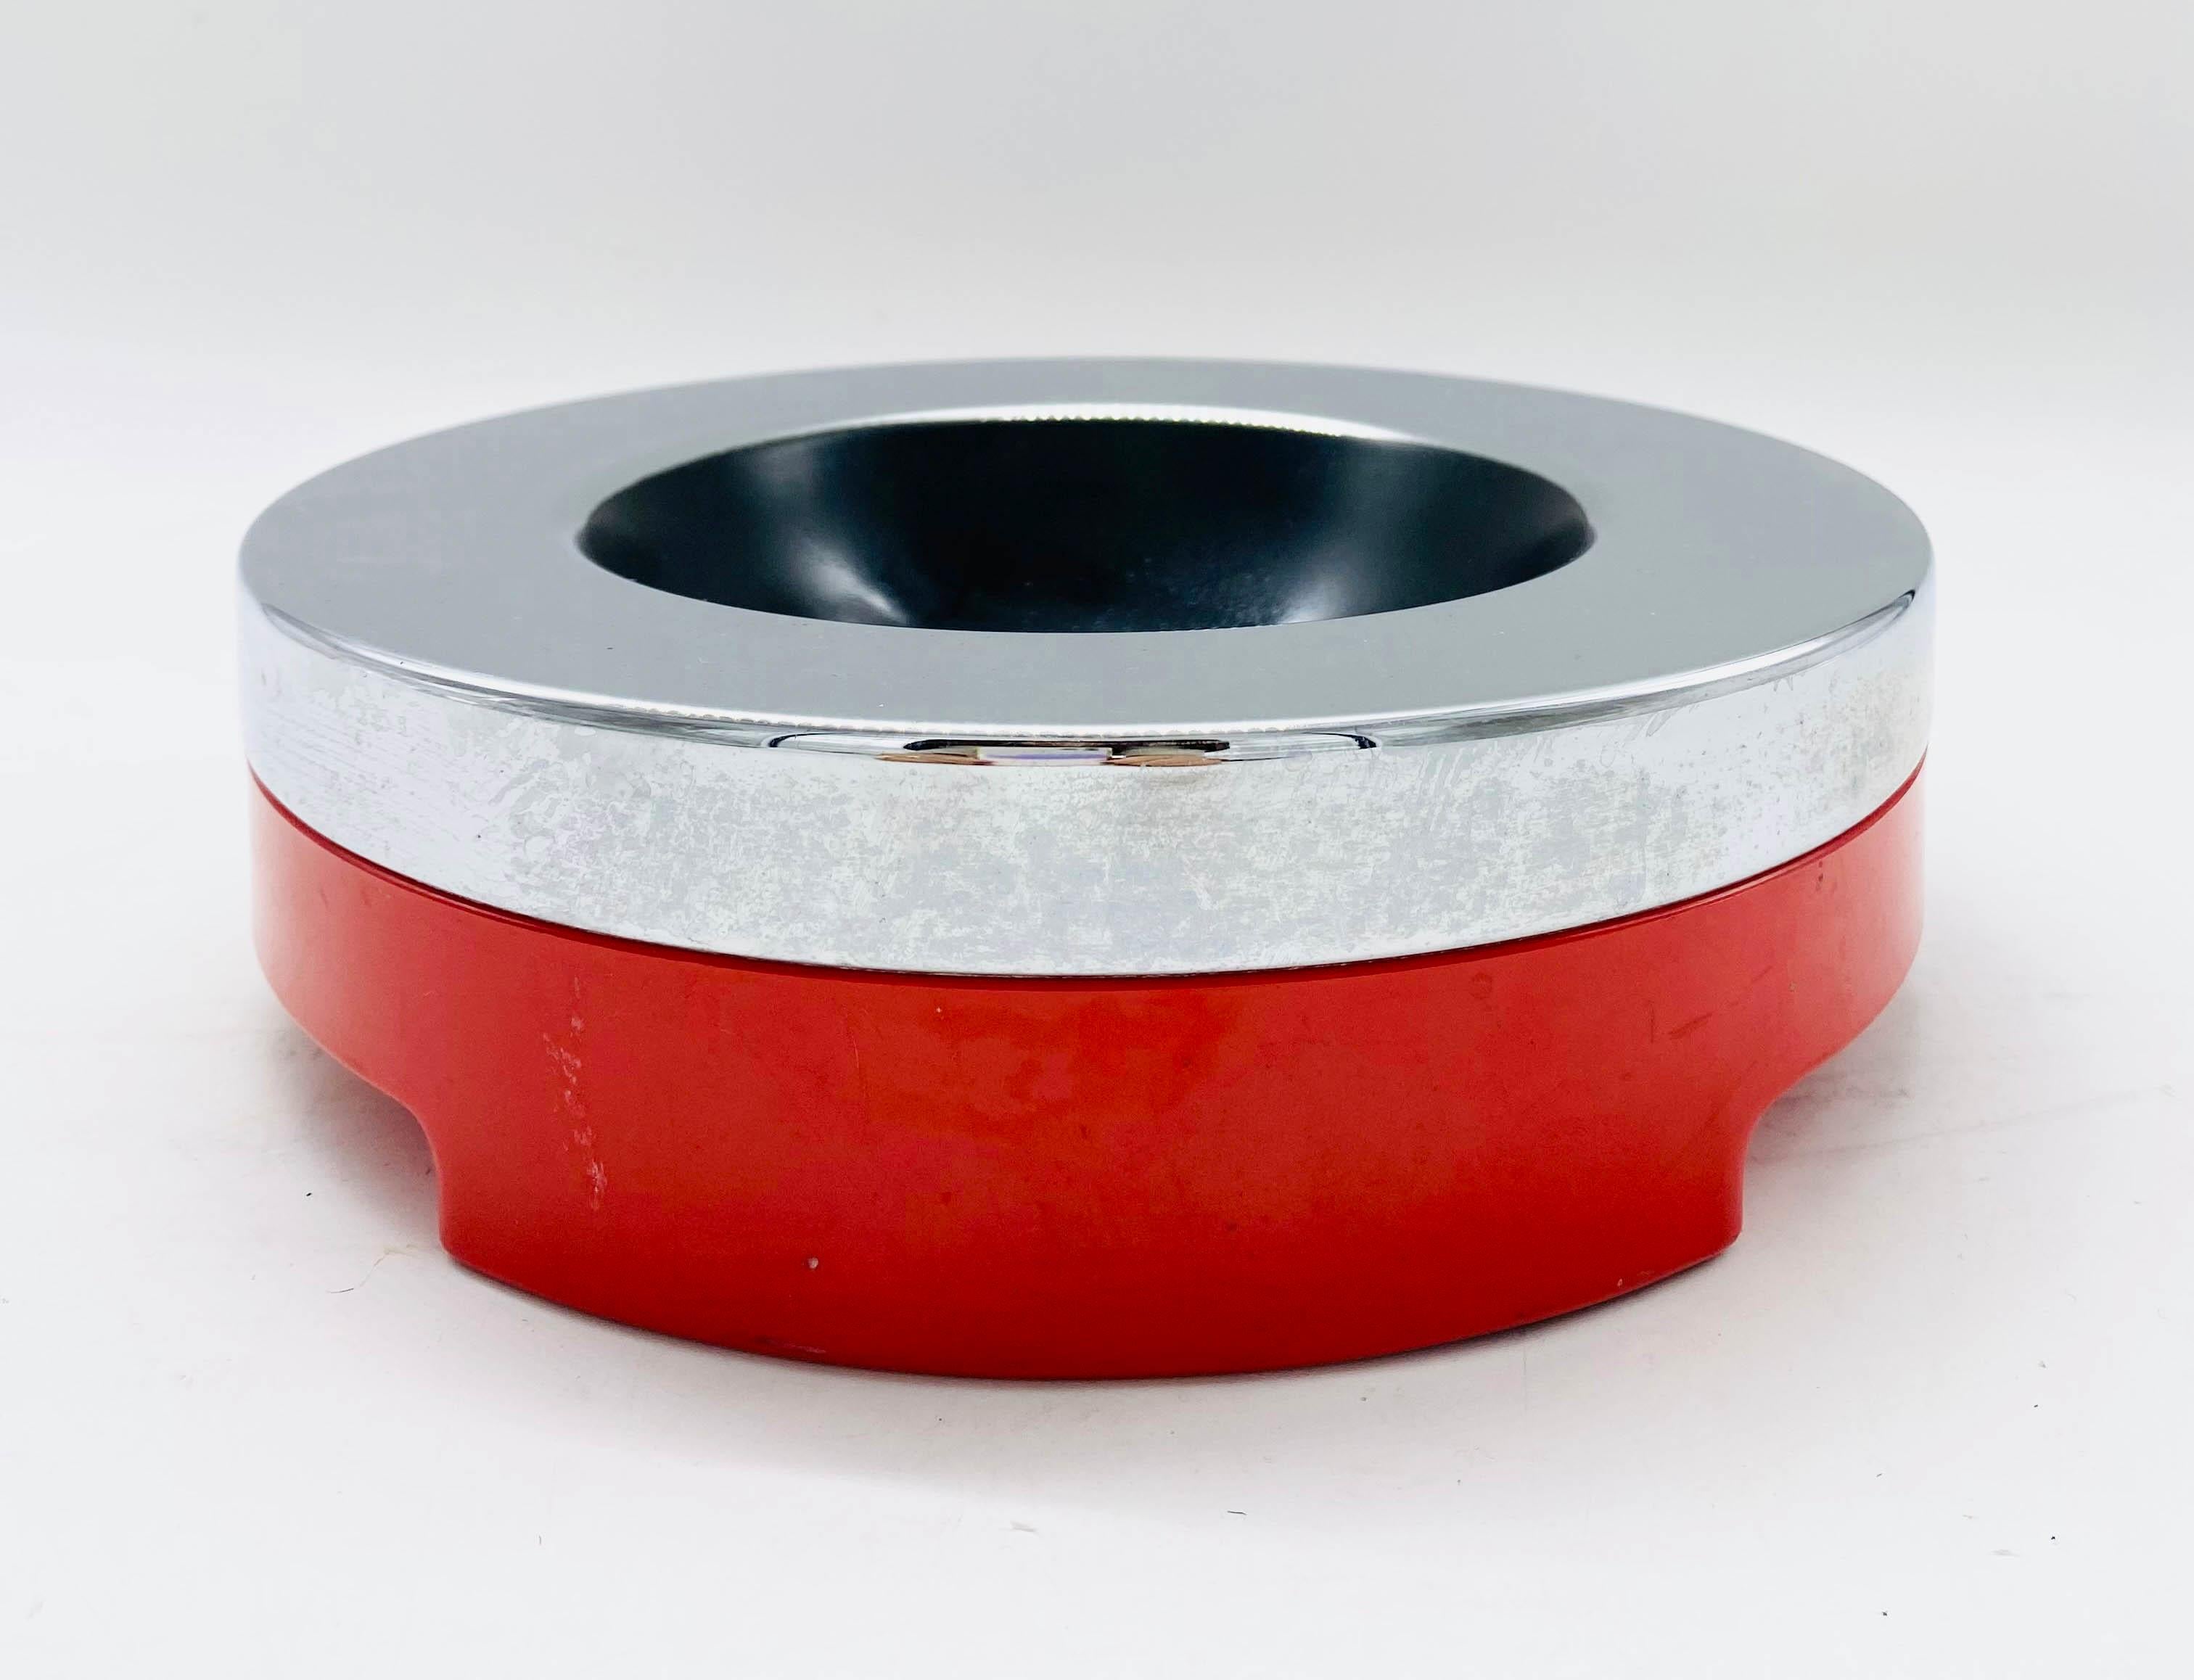 Incredible 6230 ashtray in chrome metal and red plastic. 
This wonderful piece was designed by Luigi Massoni and produced by Harvey Guzzini in Italy in the 1970s. 
The upper part of this item is made of chrome metal in like-new condition, as is